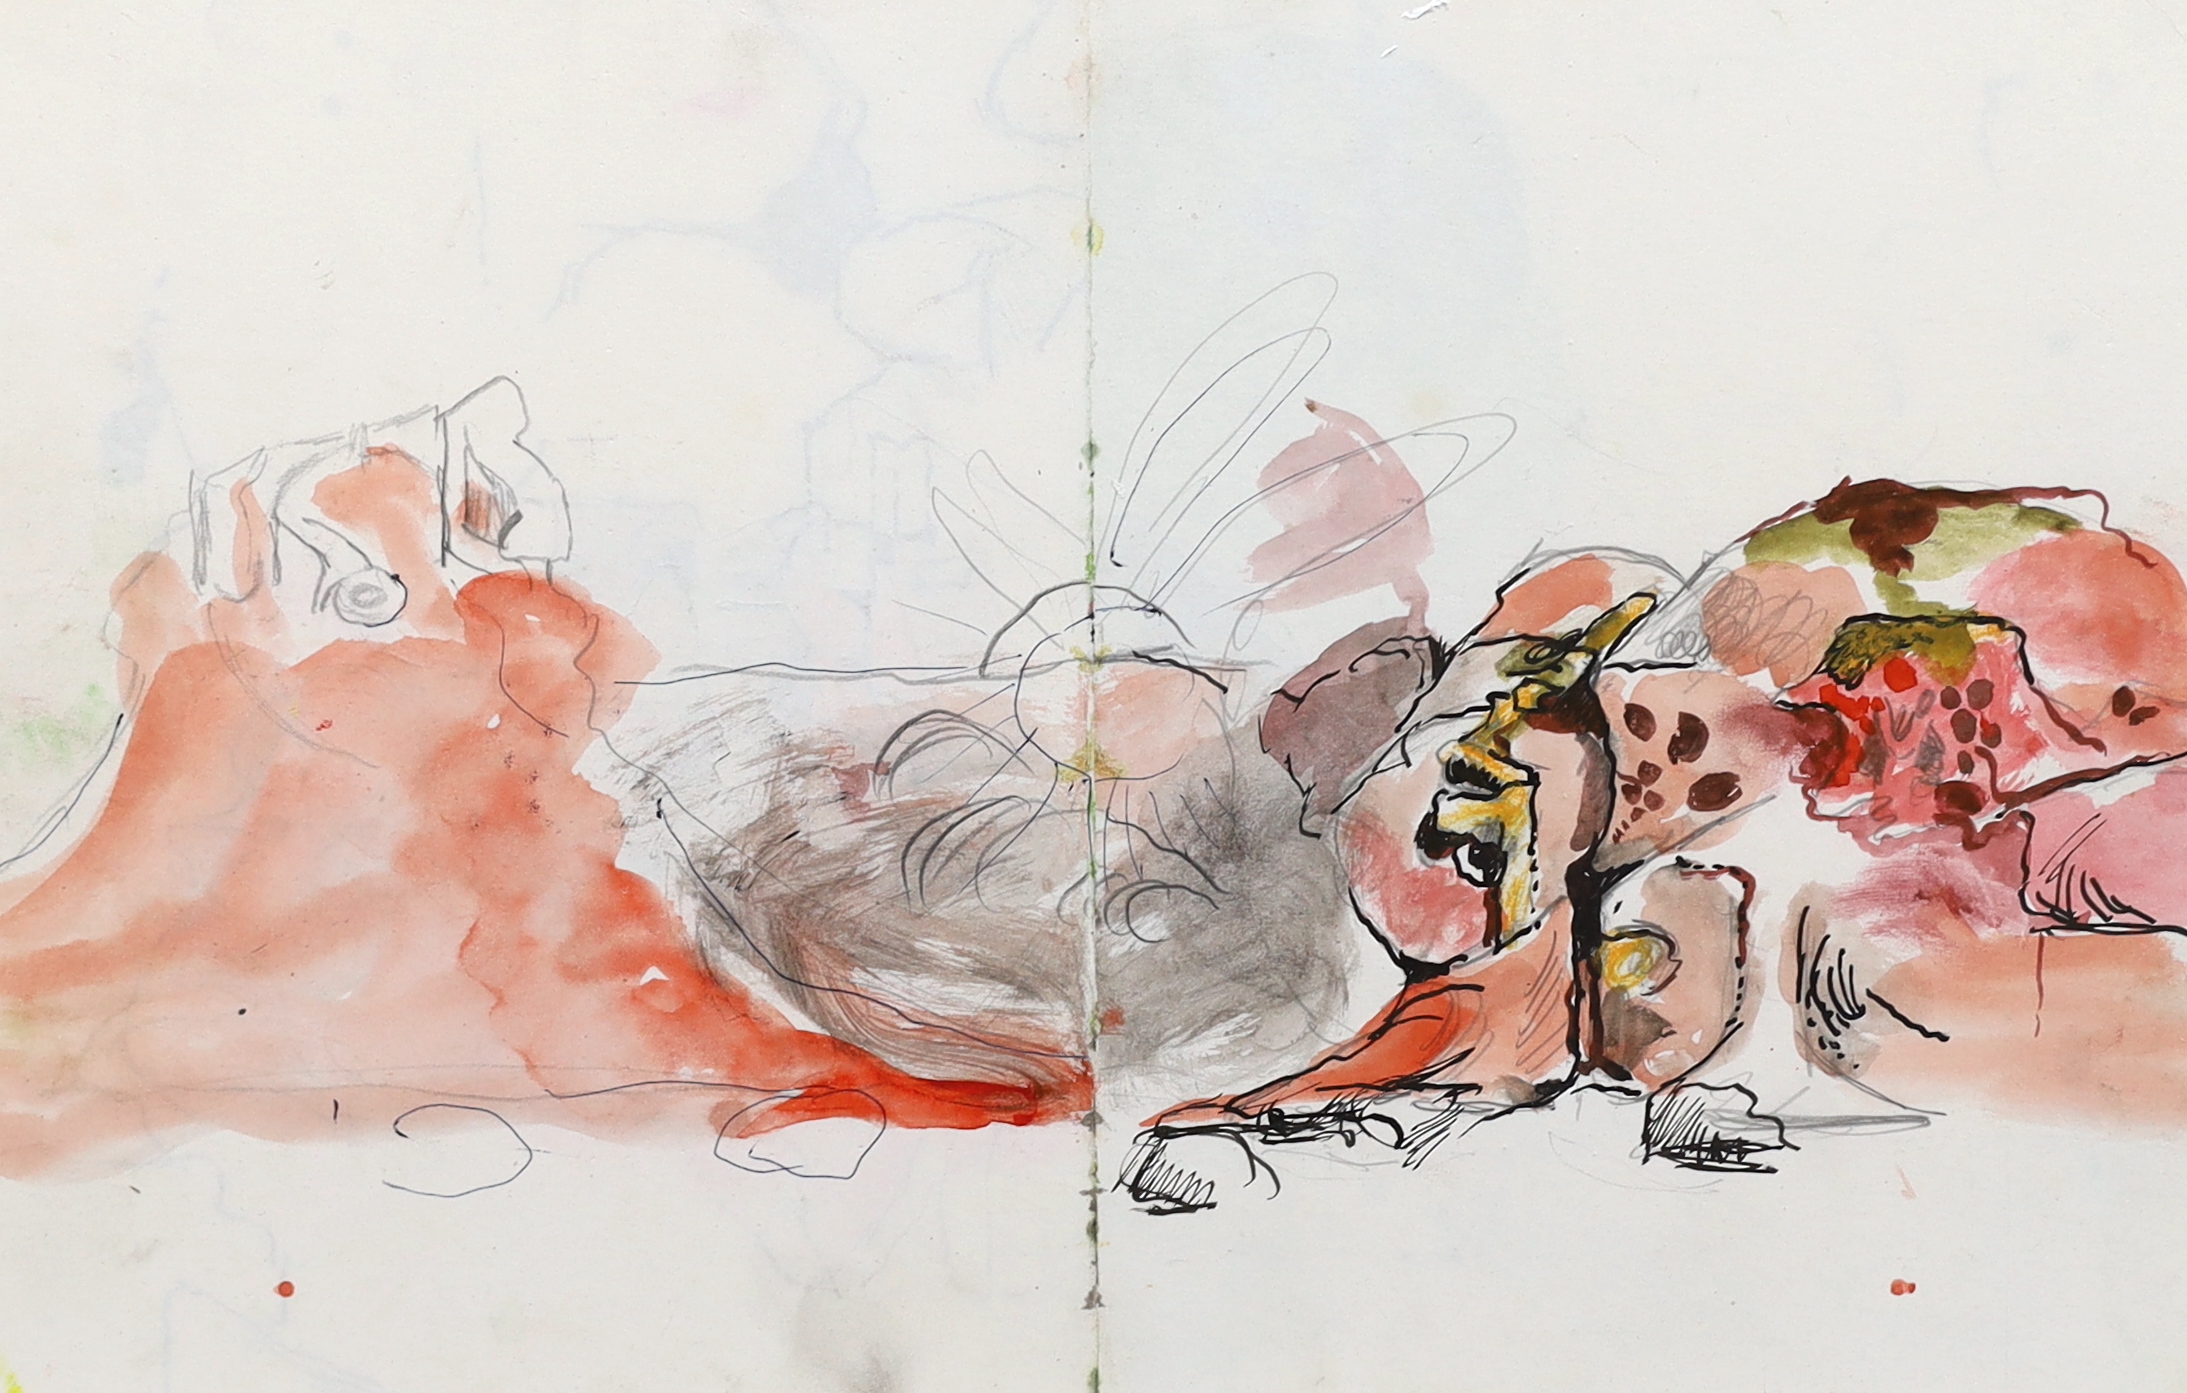 Graham Sutherland (English, 1903-1980), '81 Pink rock study with sun', original study from Graham Sutherland's sketchbooks, c.1970, watercolour, pen and ink, pencil, 22 x 34.5cm